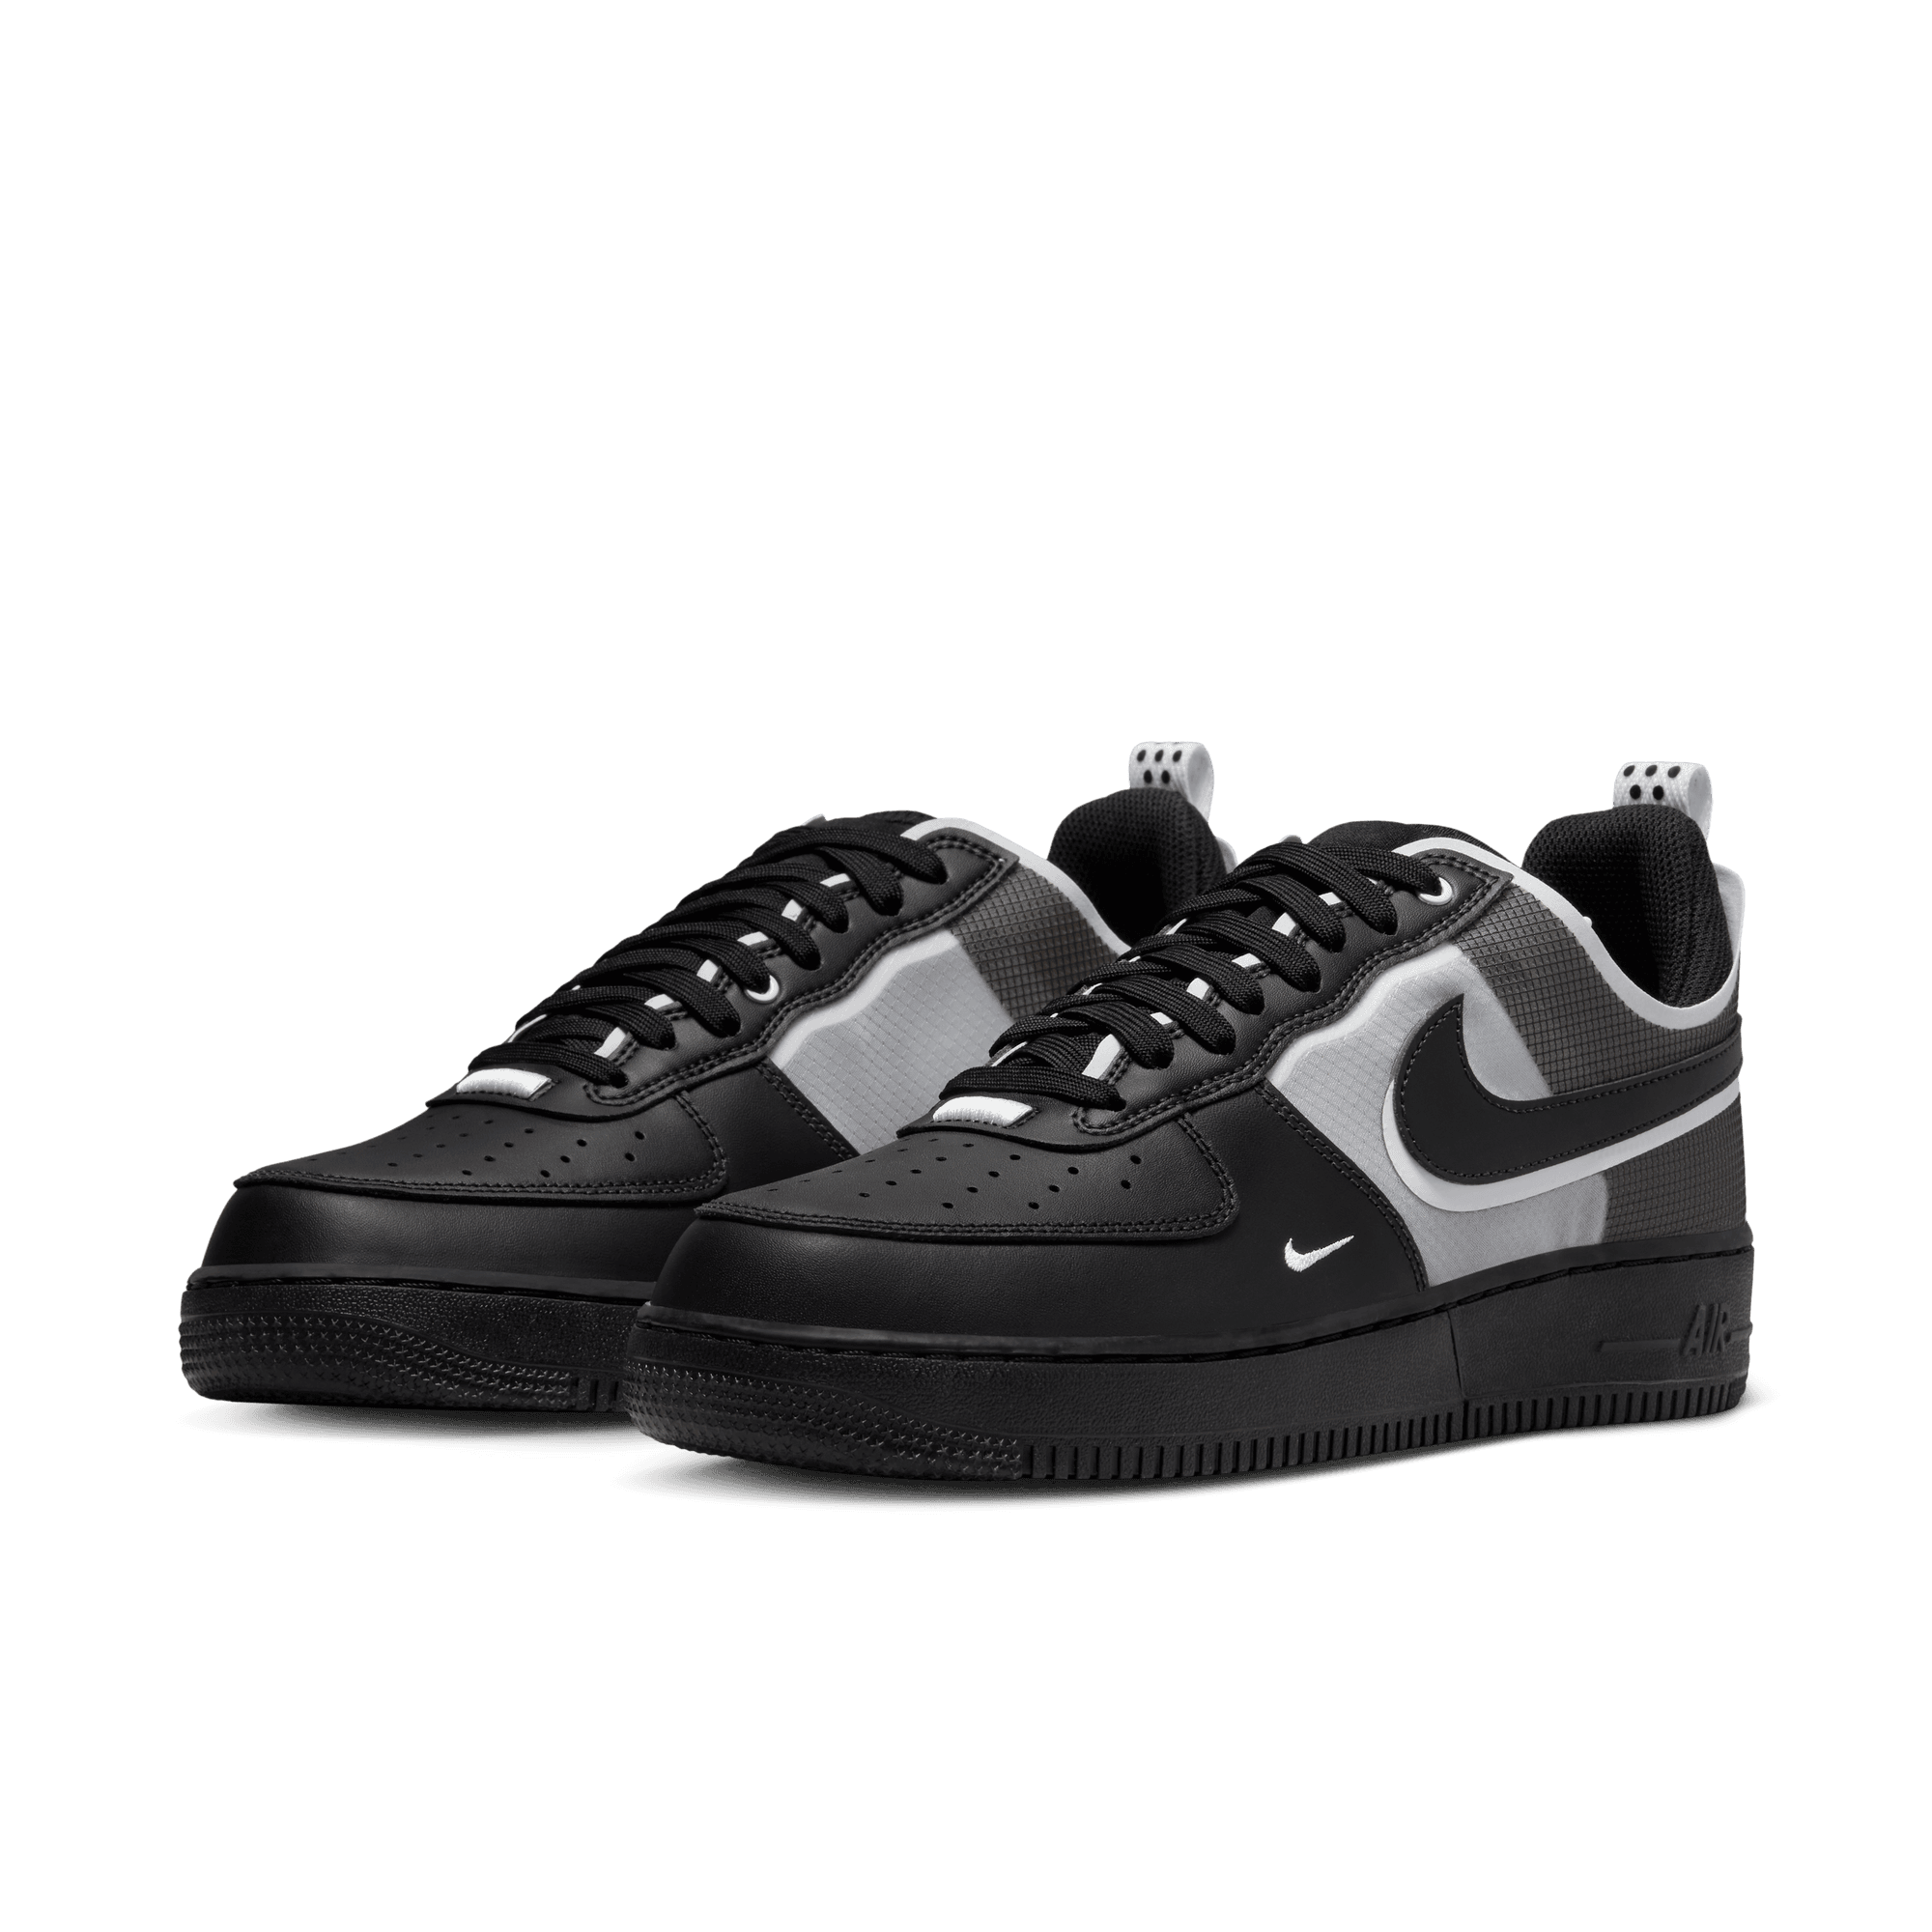  Nike Air Force 1 '07 LV8 Men's Shoes Size-7.5